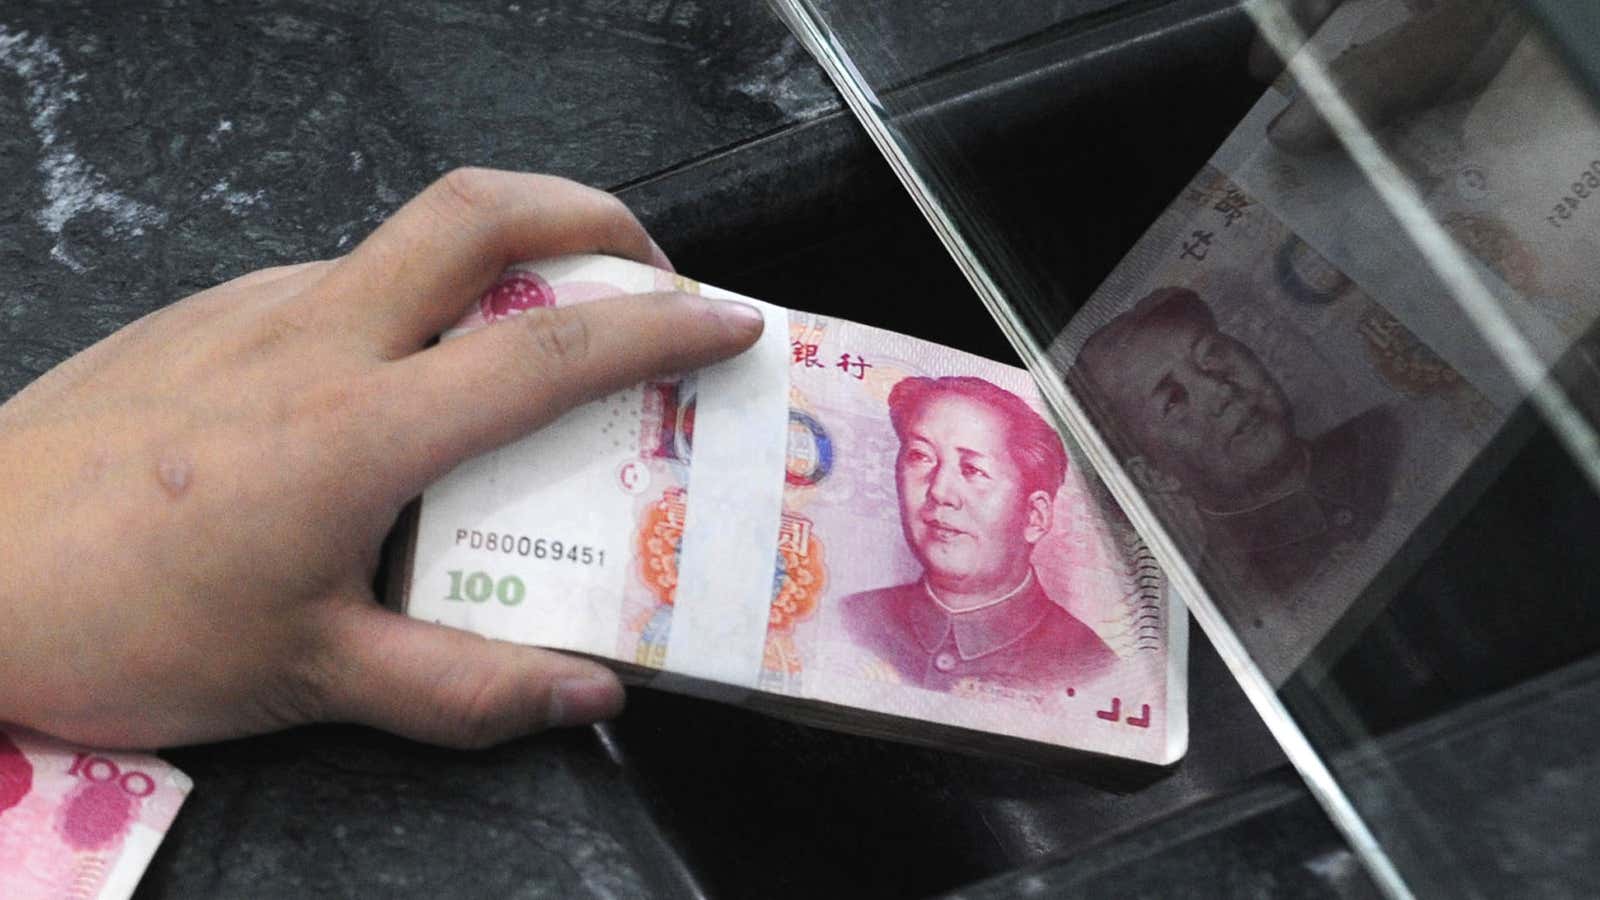 Chinese banks are making a lot more loans than they say they are.